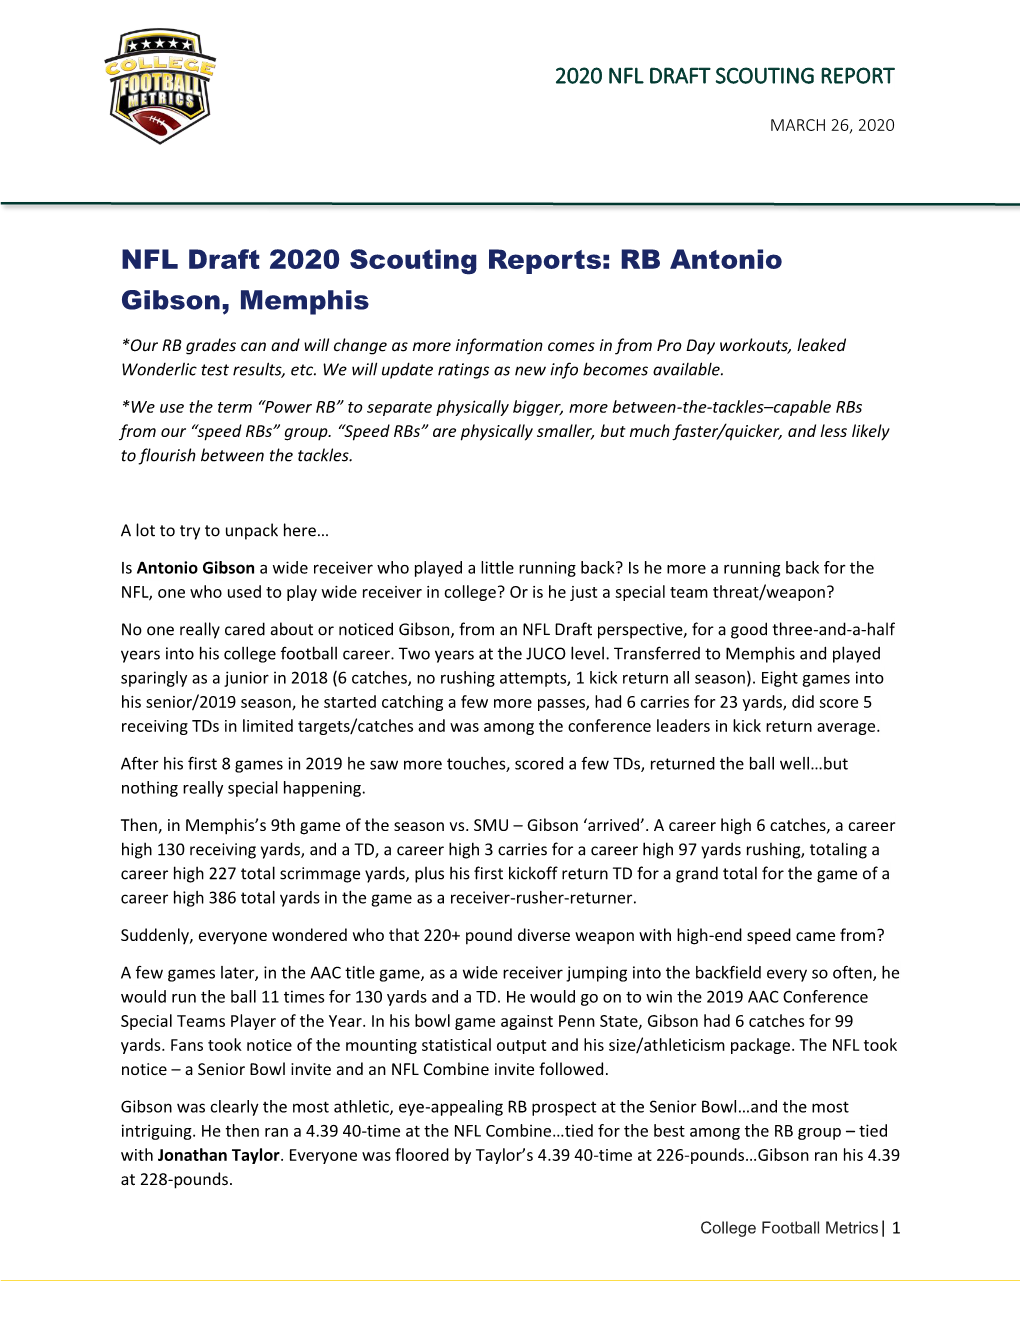 NFL Draft 2020 Scouting Reports: RB Antonio Gibson, Memphis